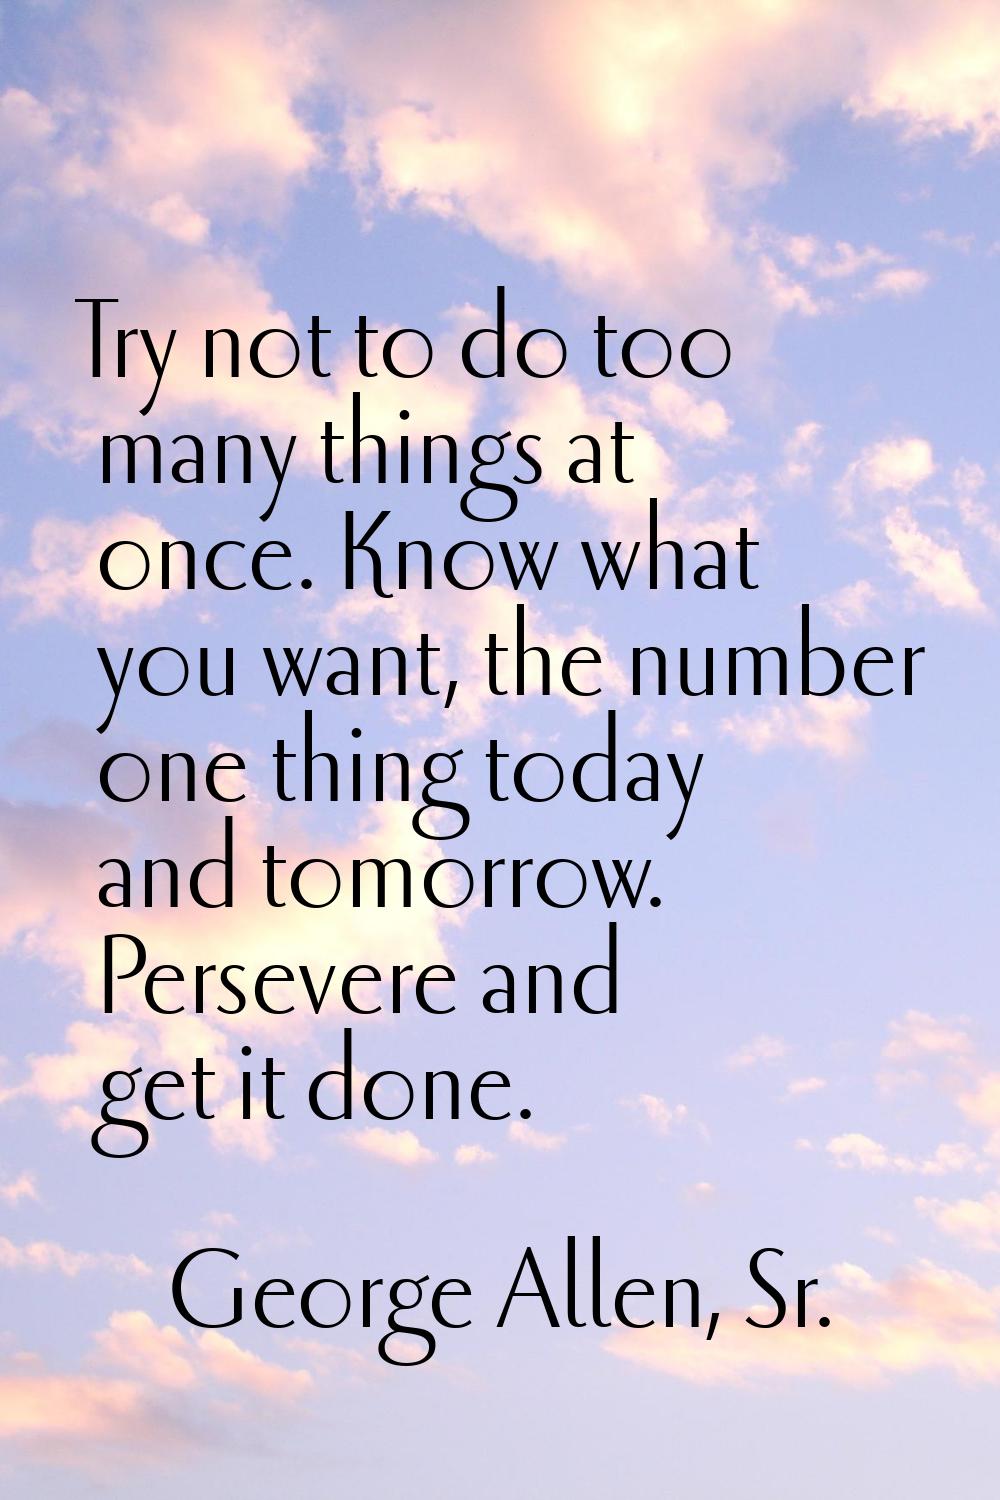 Try not to do too many things at once. Know what you want, the number one thing today and tomorrow.